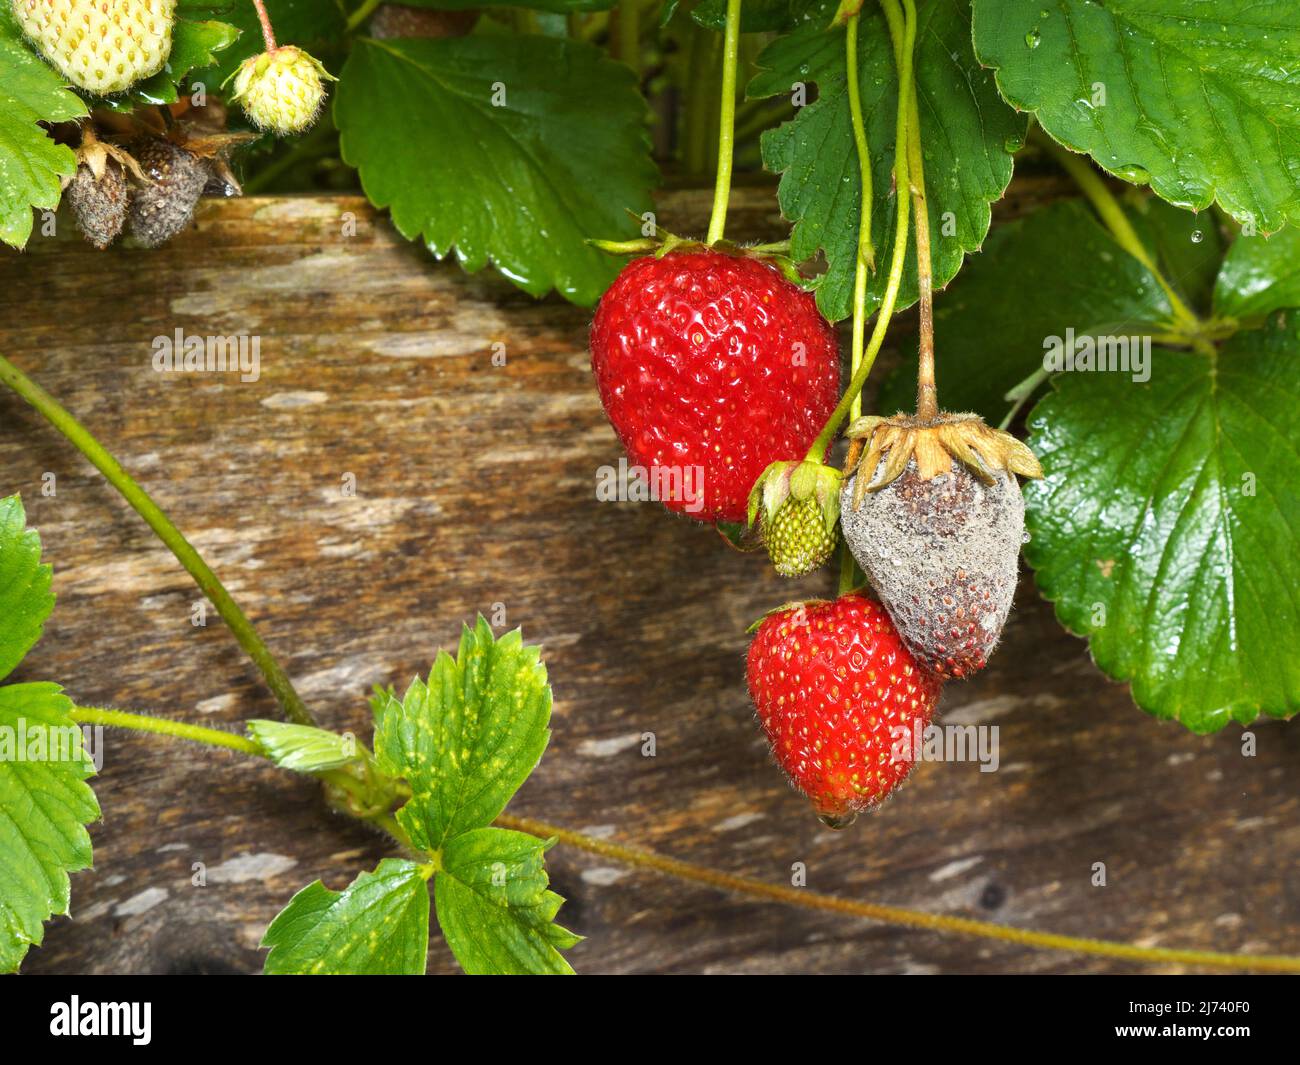 photo shows a close up of Botrytis Fruit Rot or Gray Mold of strawberries - landscape format Stock Photo